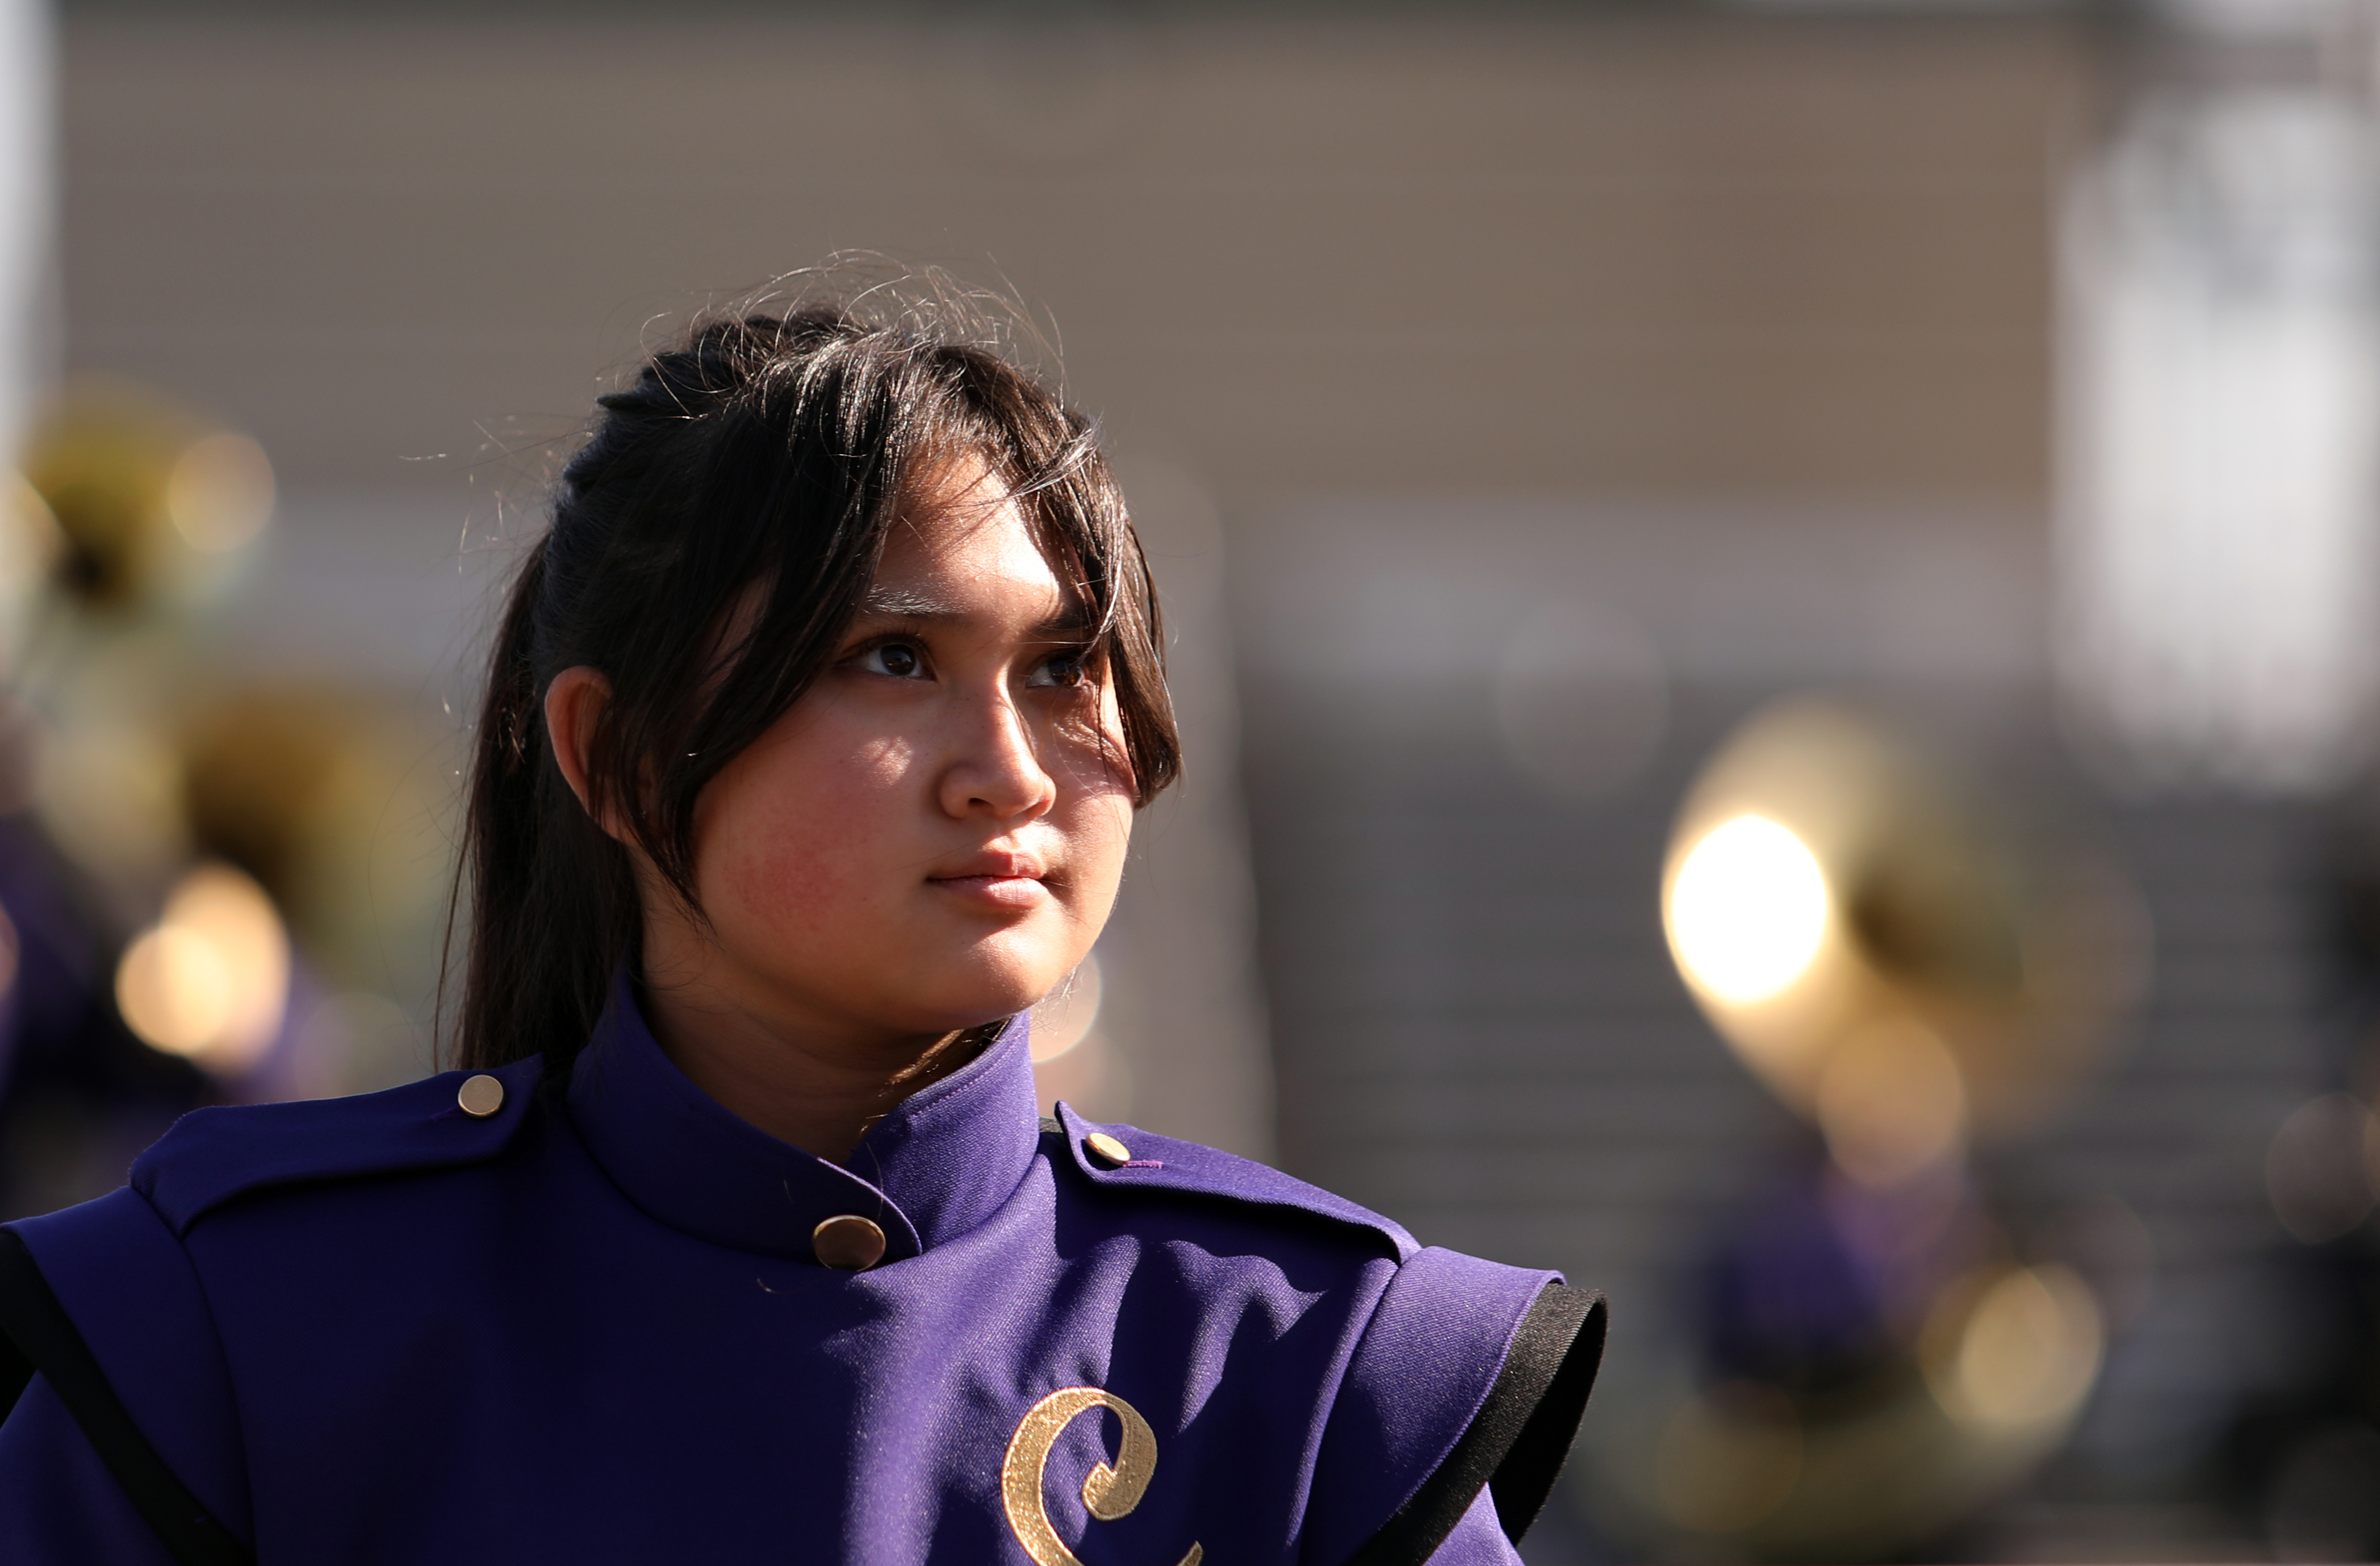 Drum Majors Archives - The Chess Drum